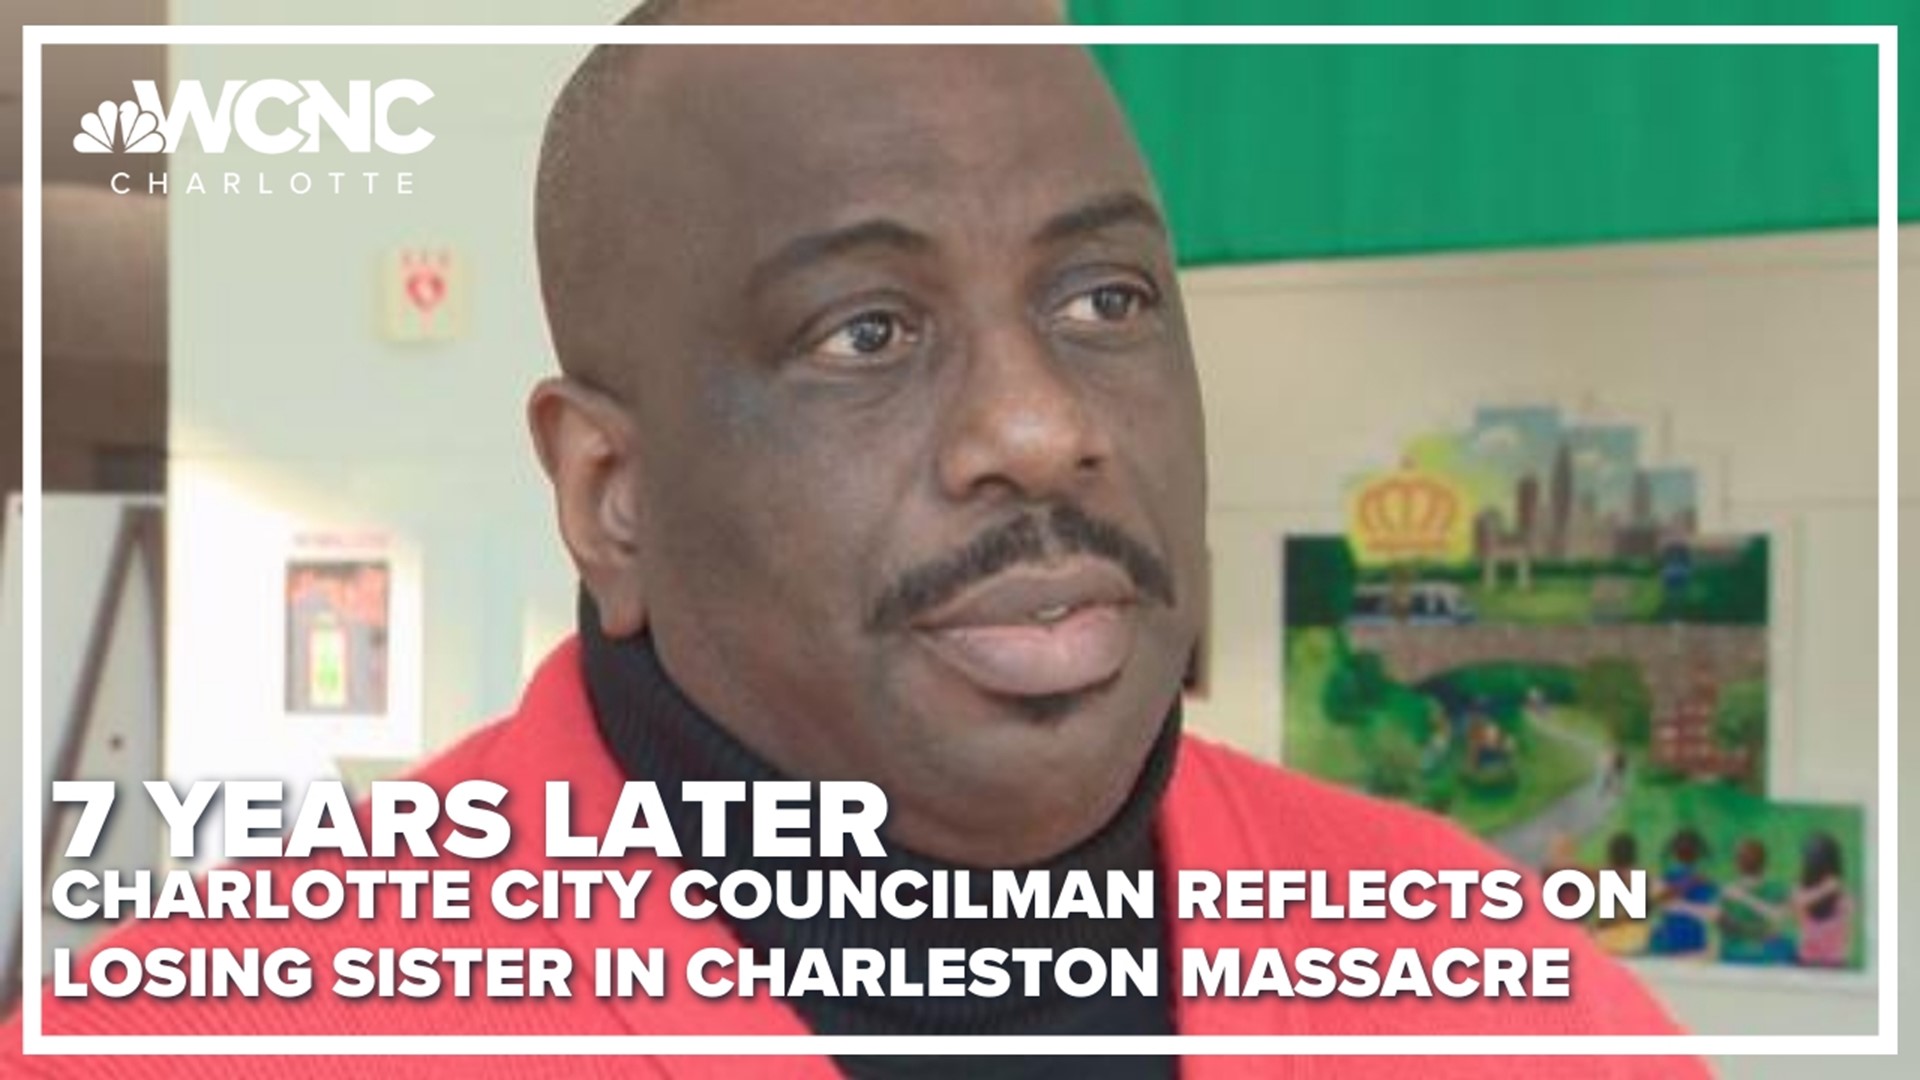 Malcolm Graham's sister died in a shooting carried out by a white supremacist at Mother Emanuel AME.